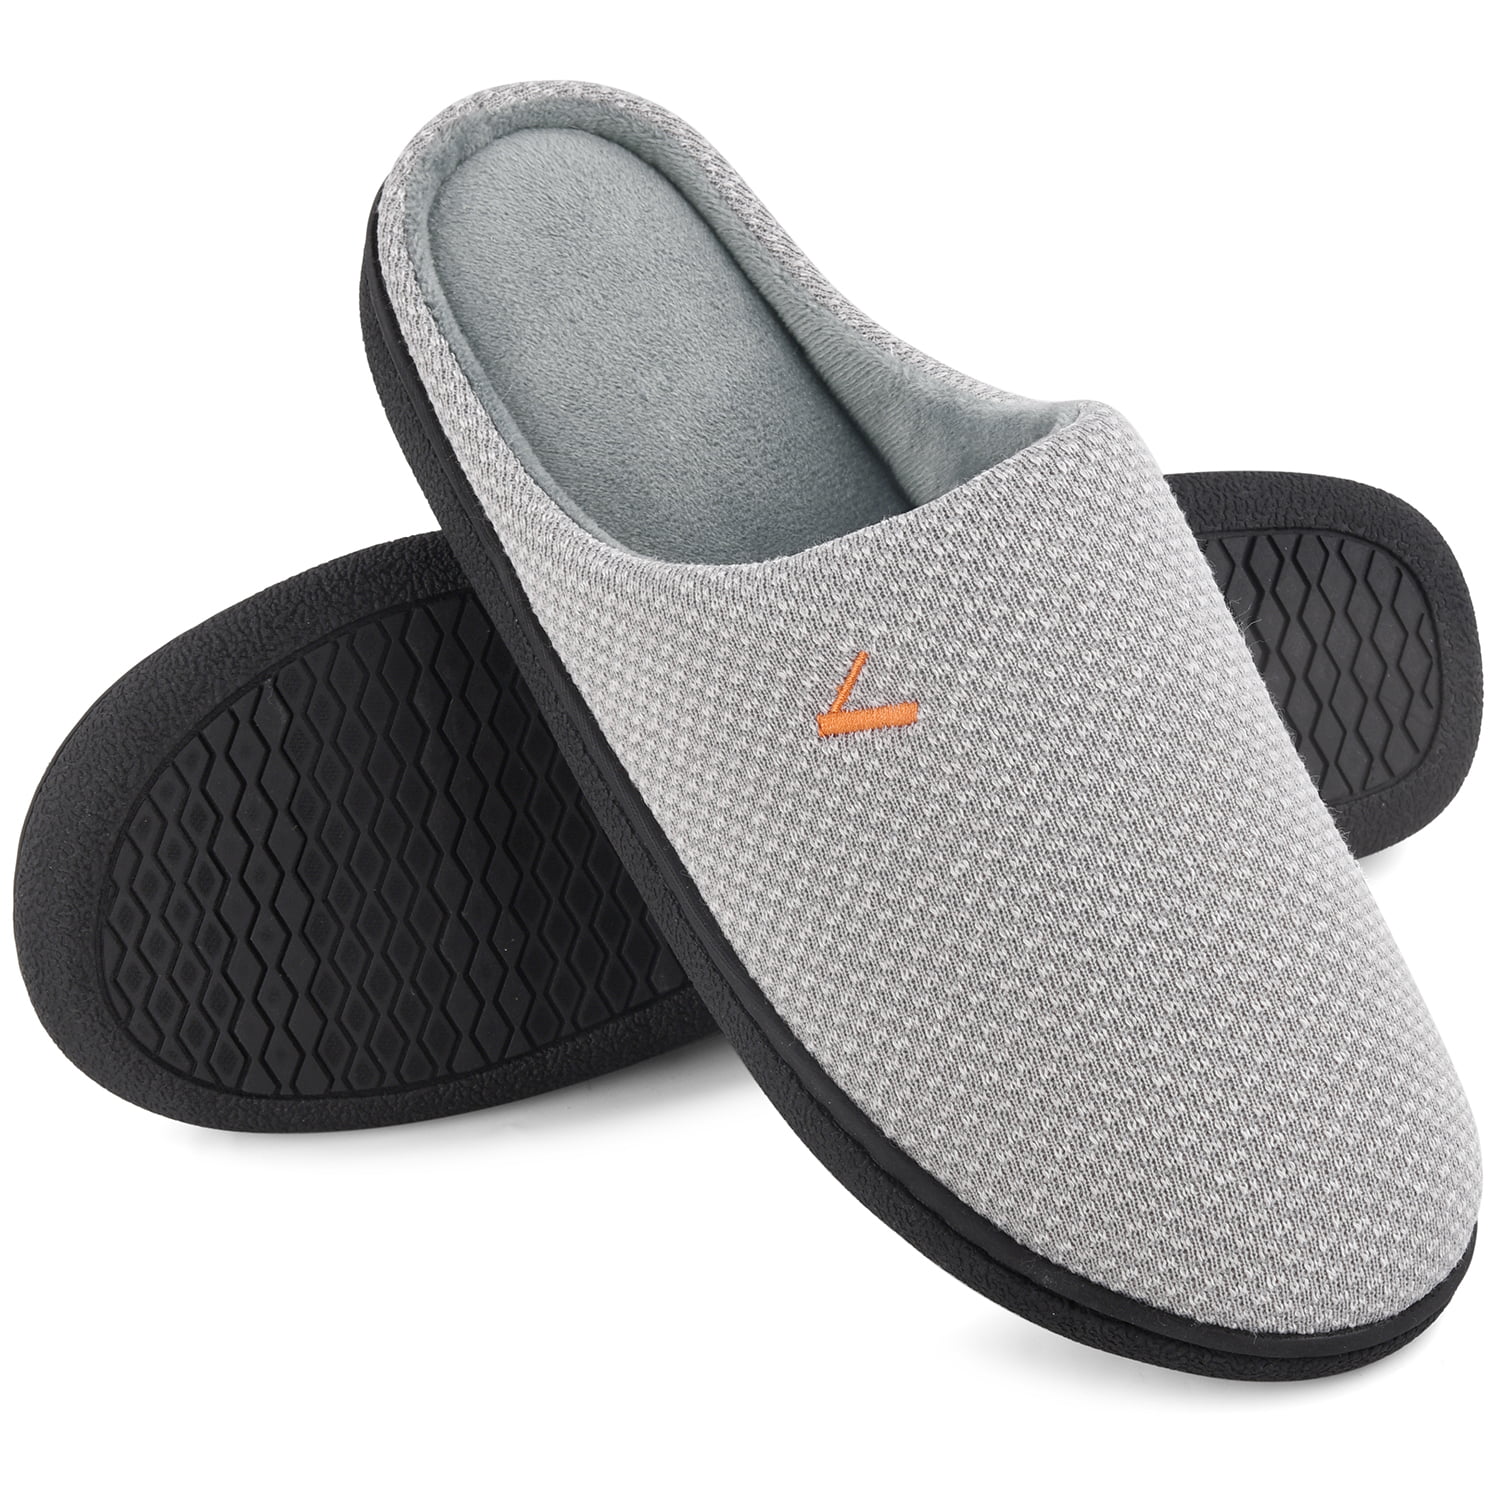 women's slippers with memory foam insoles